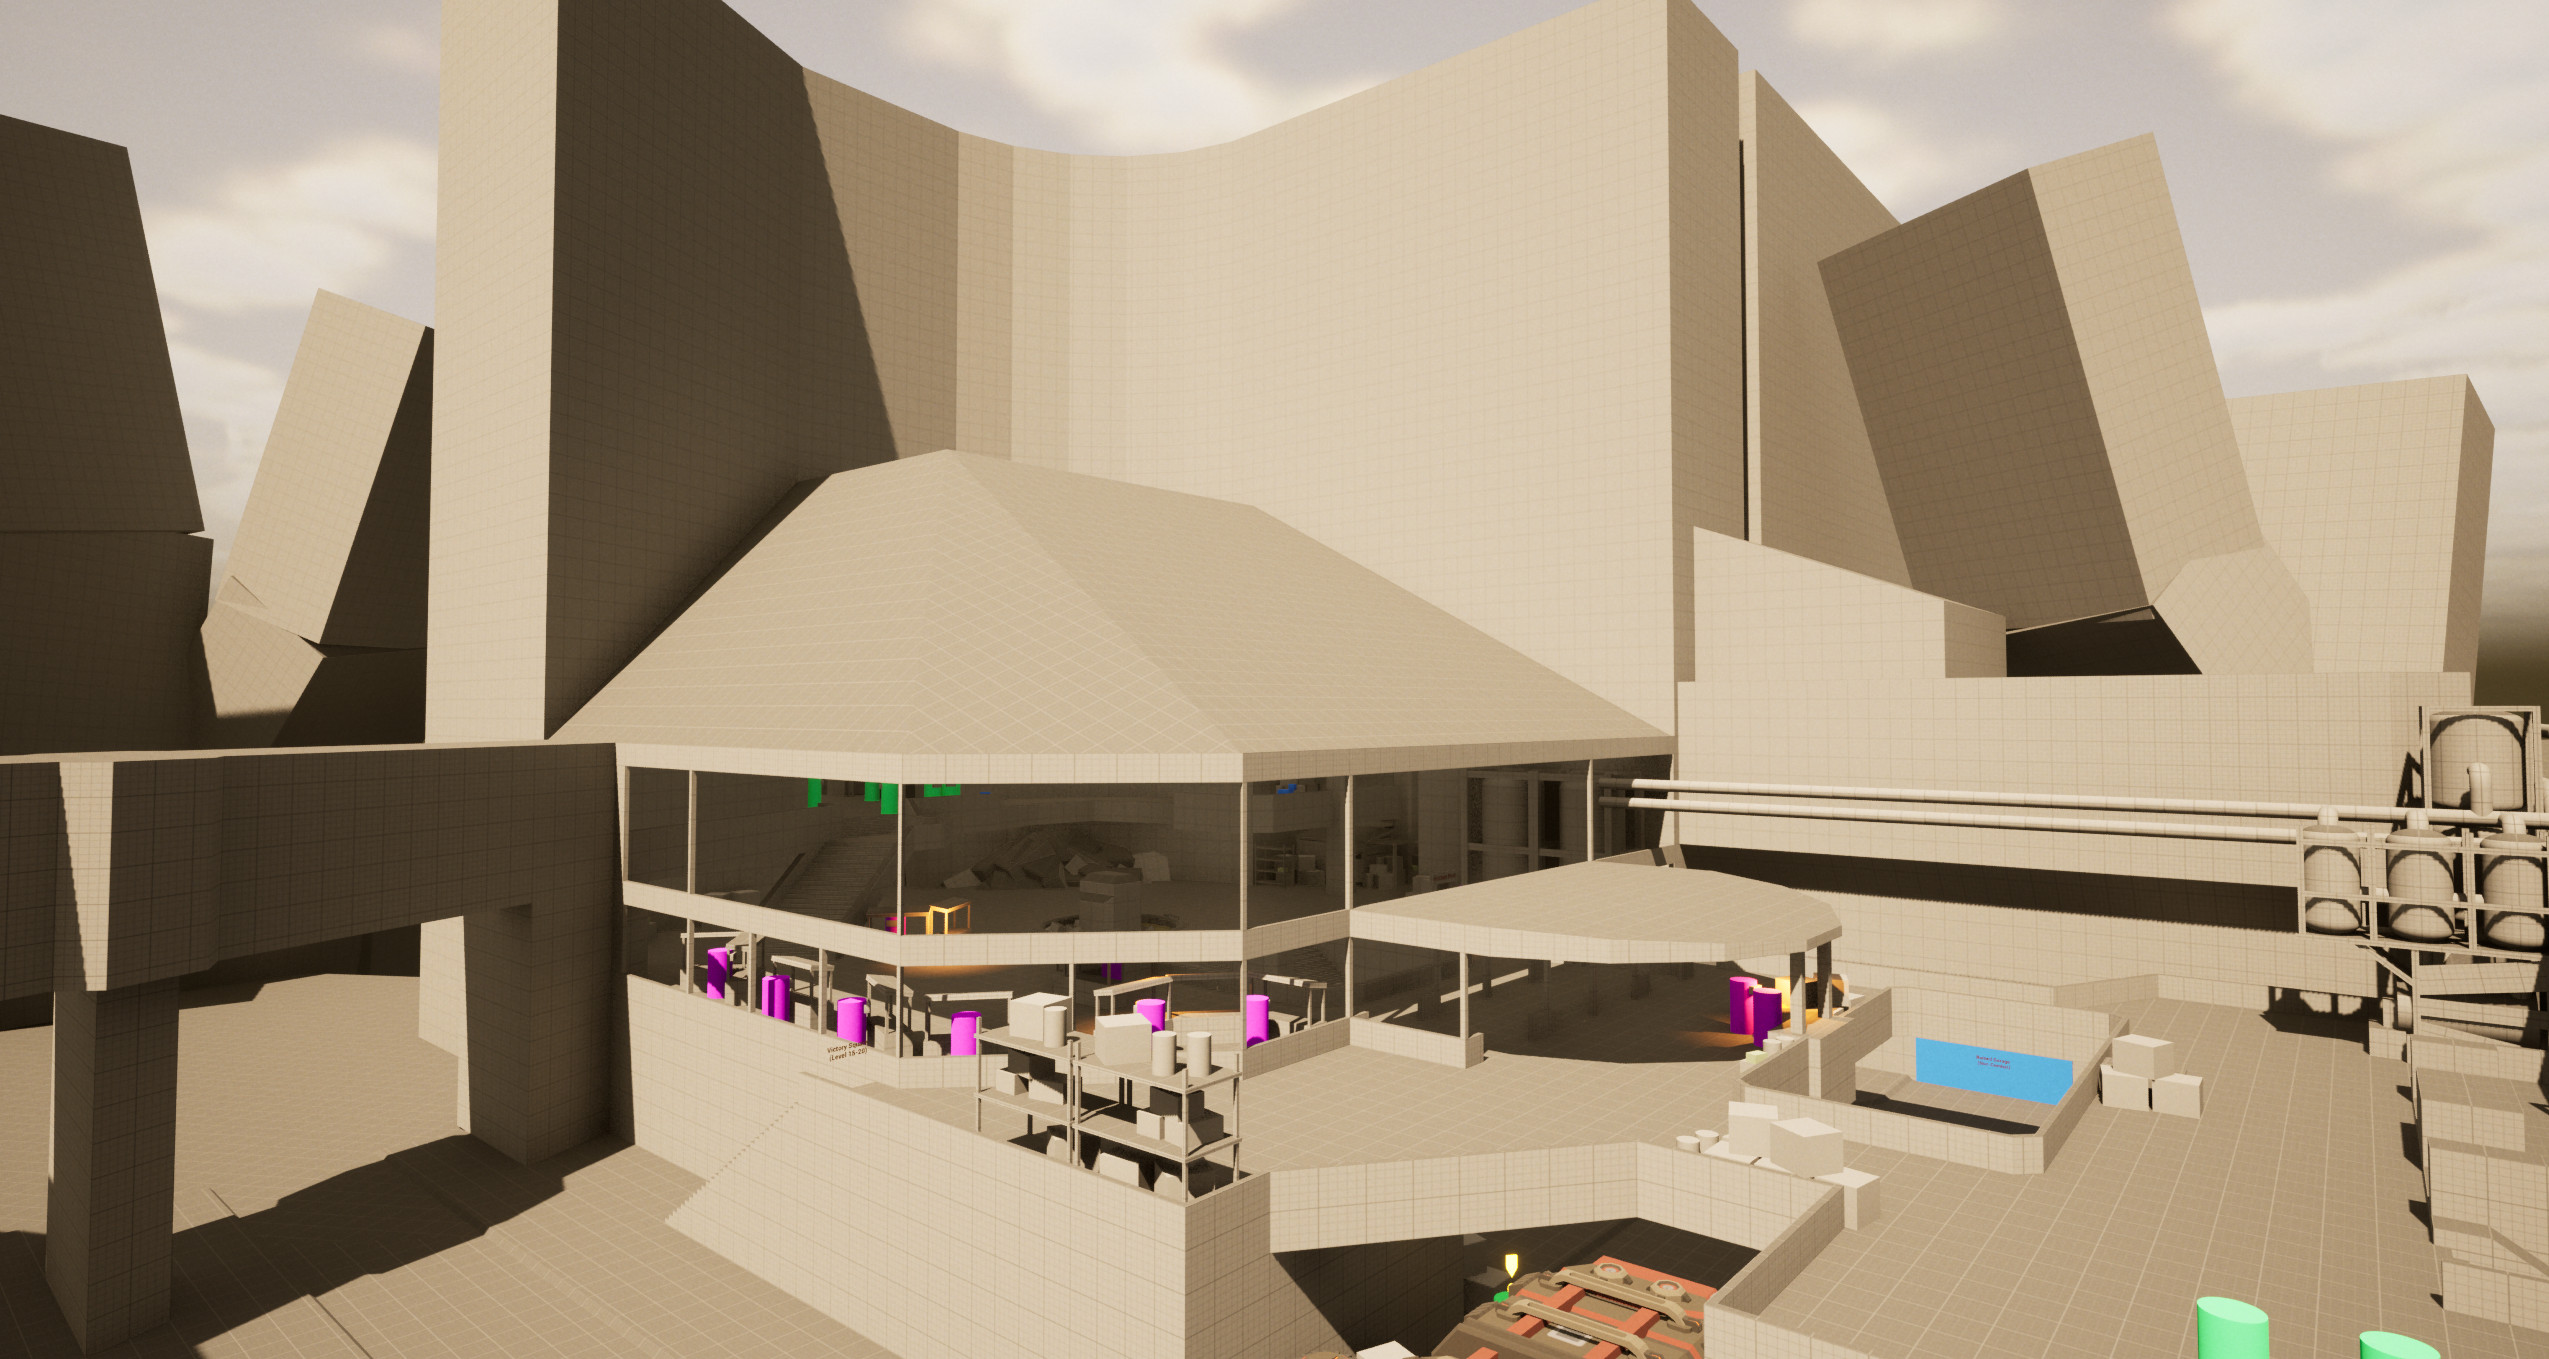 An exterior shot of the atrium lobby and larger hotel structure.